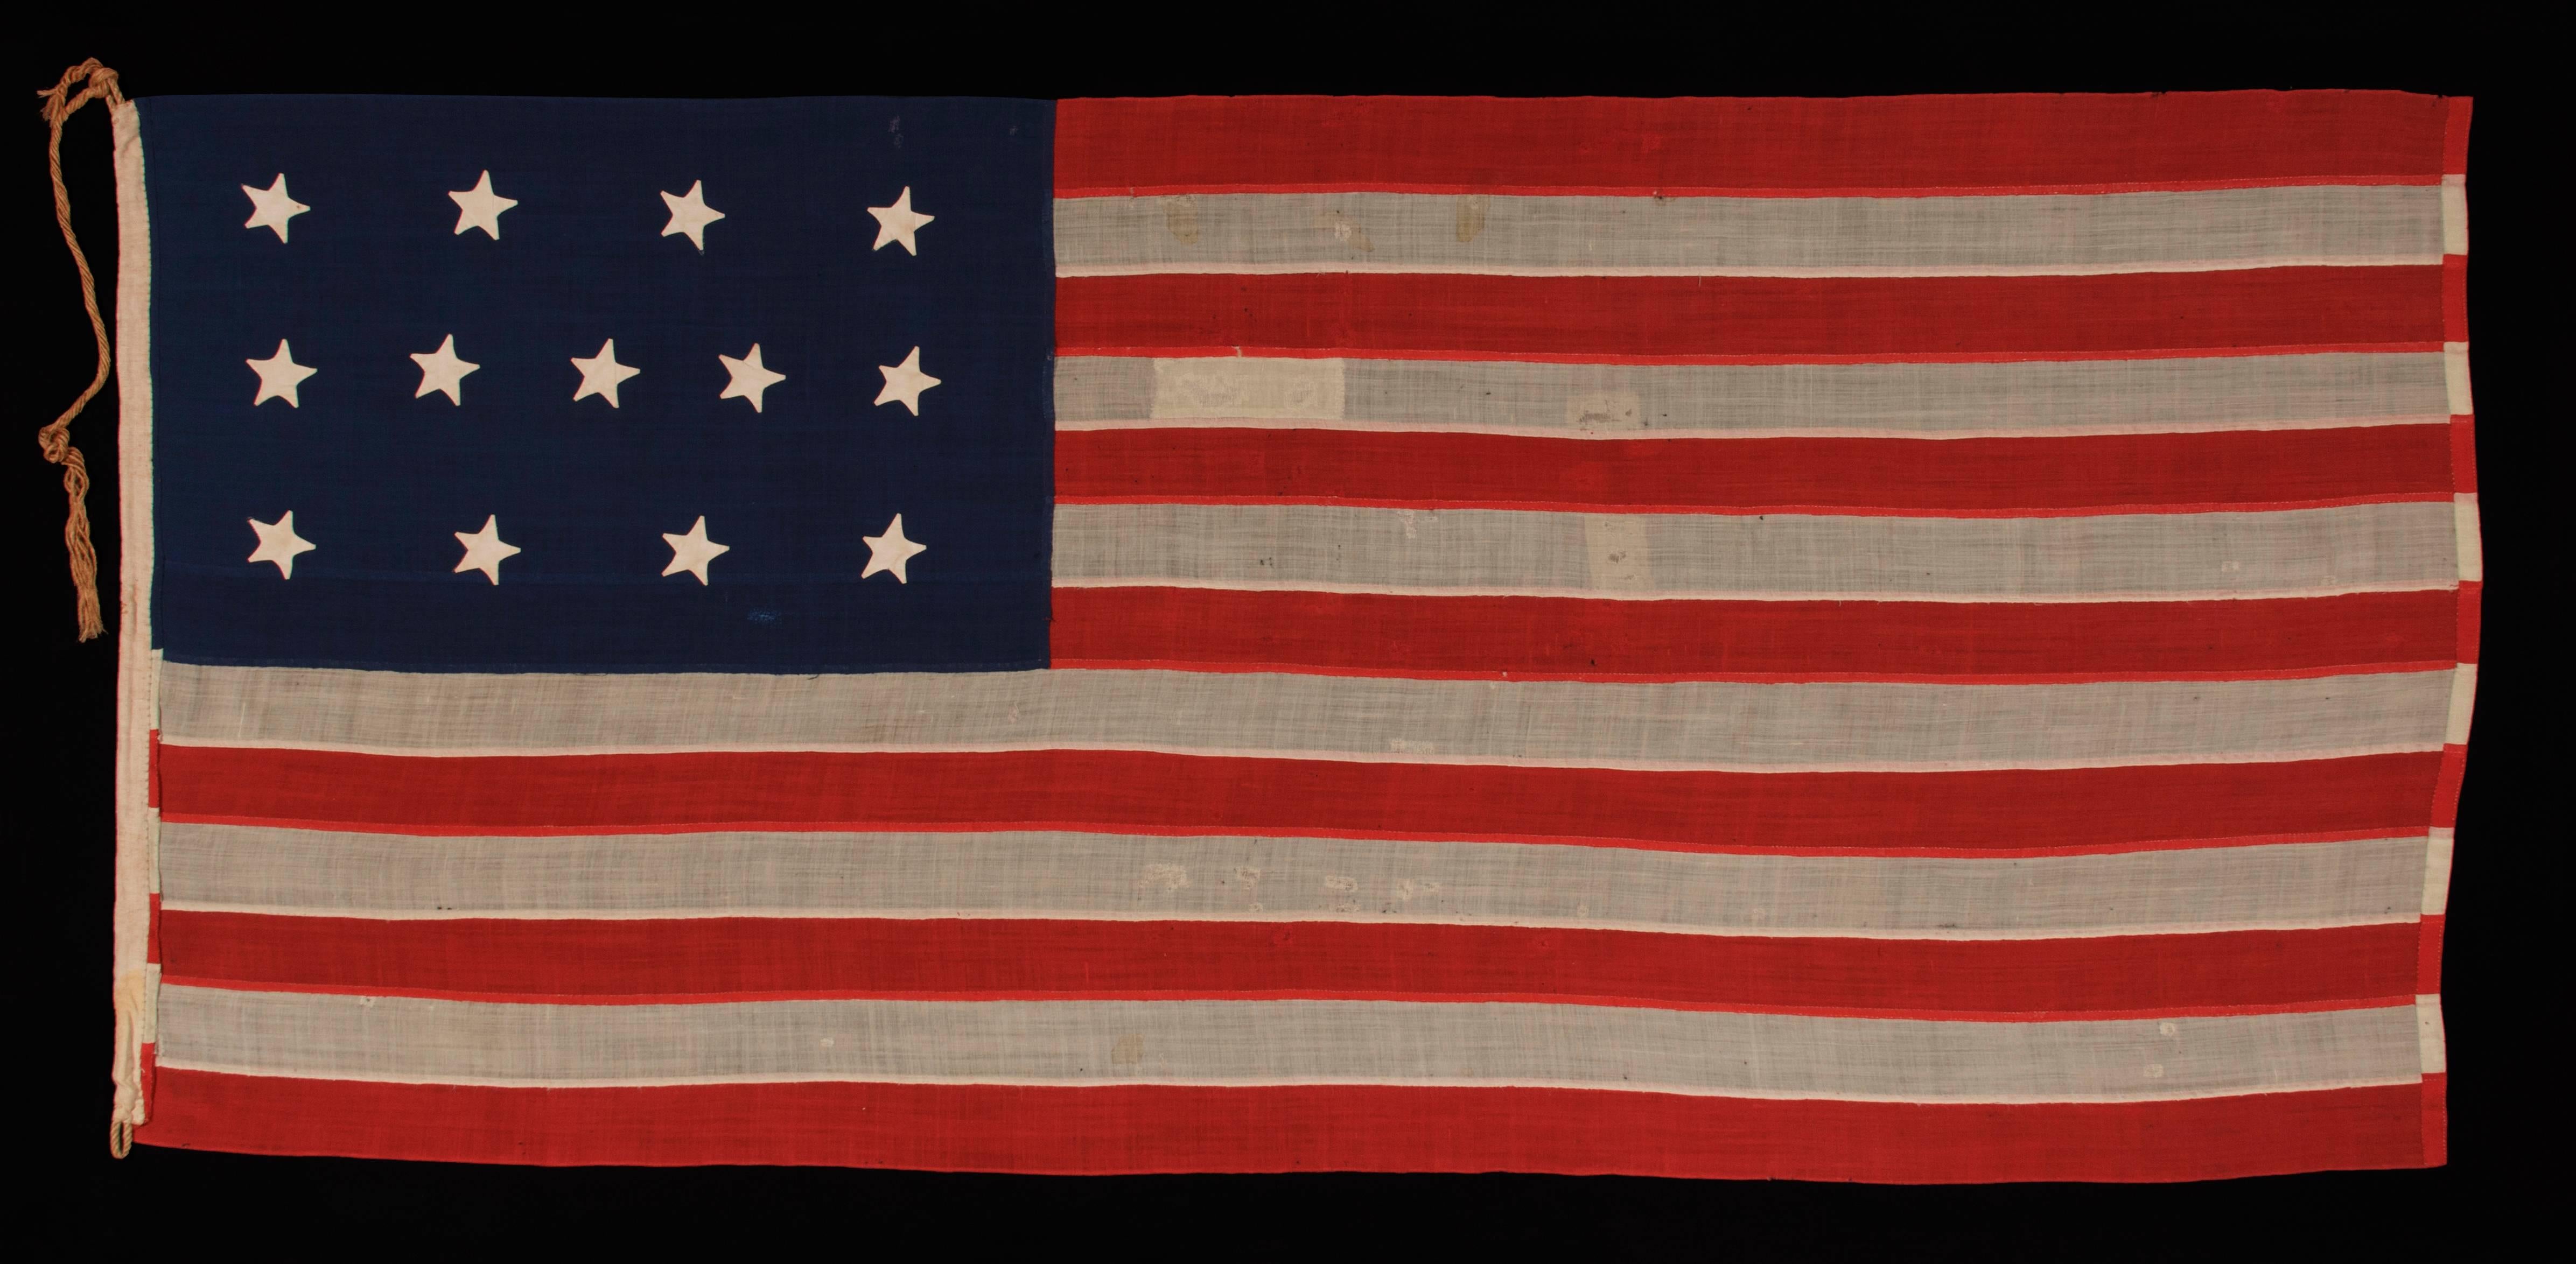 ENTIRELY HAND-SEWN, 13 STAR, U.S. NAVY SMALL BOAT ENSIGN WITH A 4-5-4 CONFIGURATION, MADE SOMETIME BETWEEN 1850 AND THE OPENING YEARS OF THE CIVIL WAR (1861-63): 

U.S. Navy small boat ensign with 13 stars arranged in a 4-5-4 pattern of lineal rows.